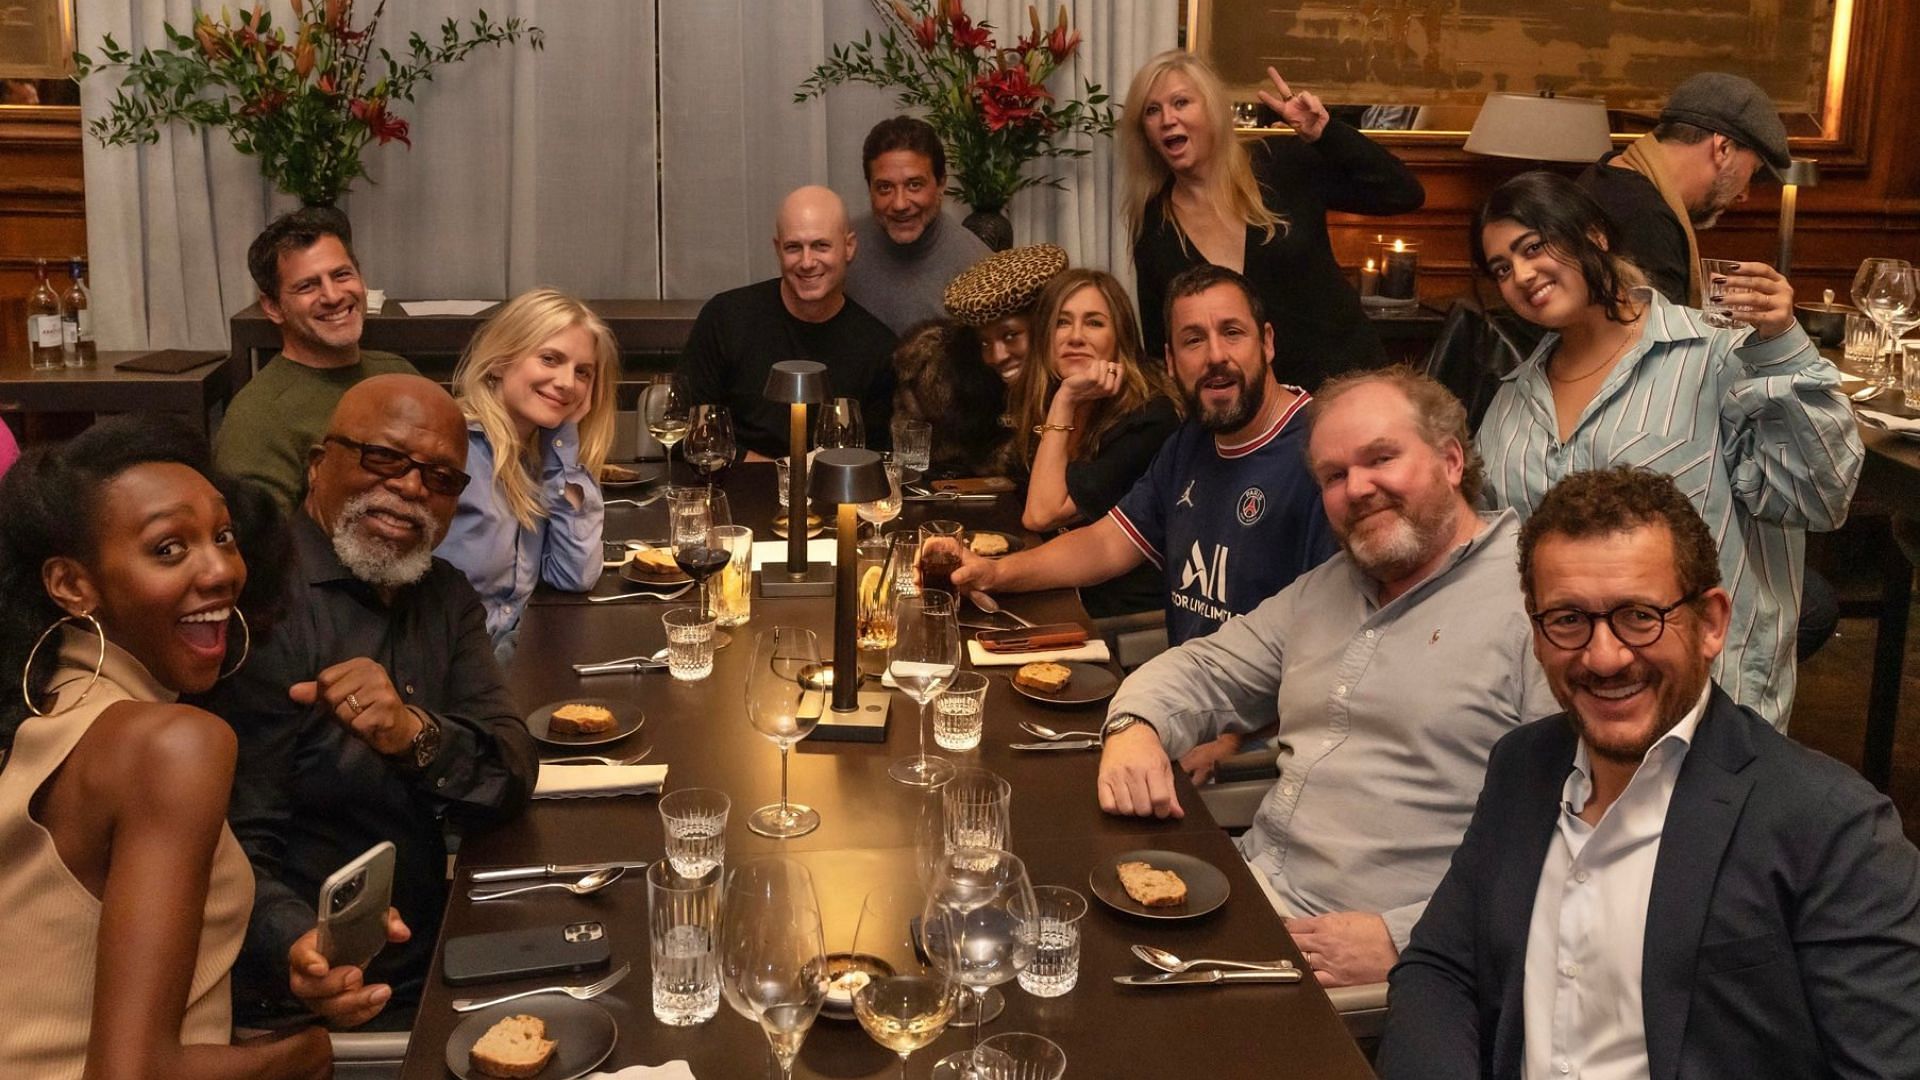 A glimpse of the Murder Mystery 2 cast dinner shared by producer Tripp Vinson (Image via @TrippVinson/Twitter)